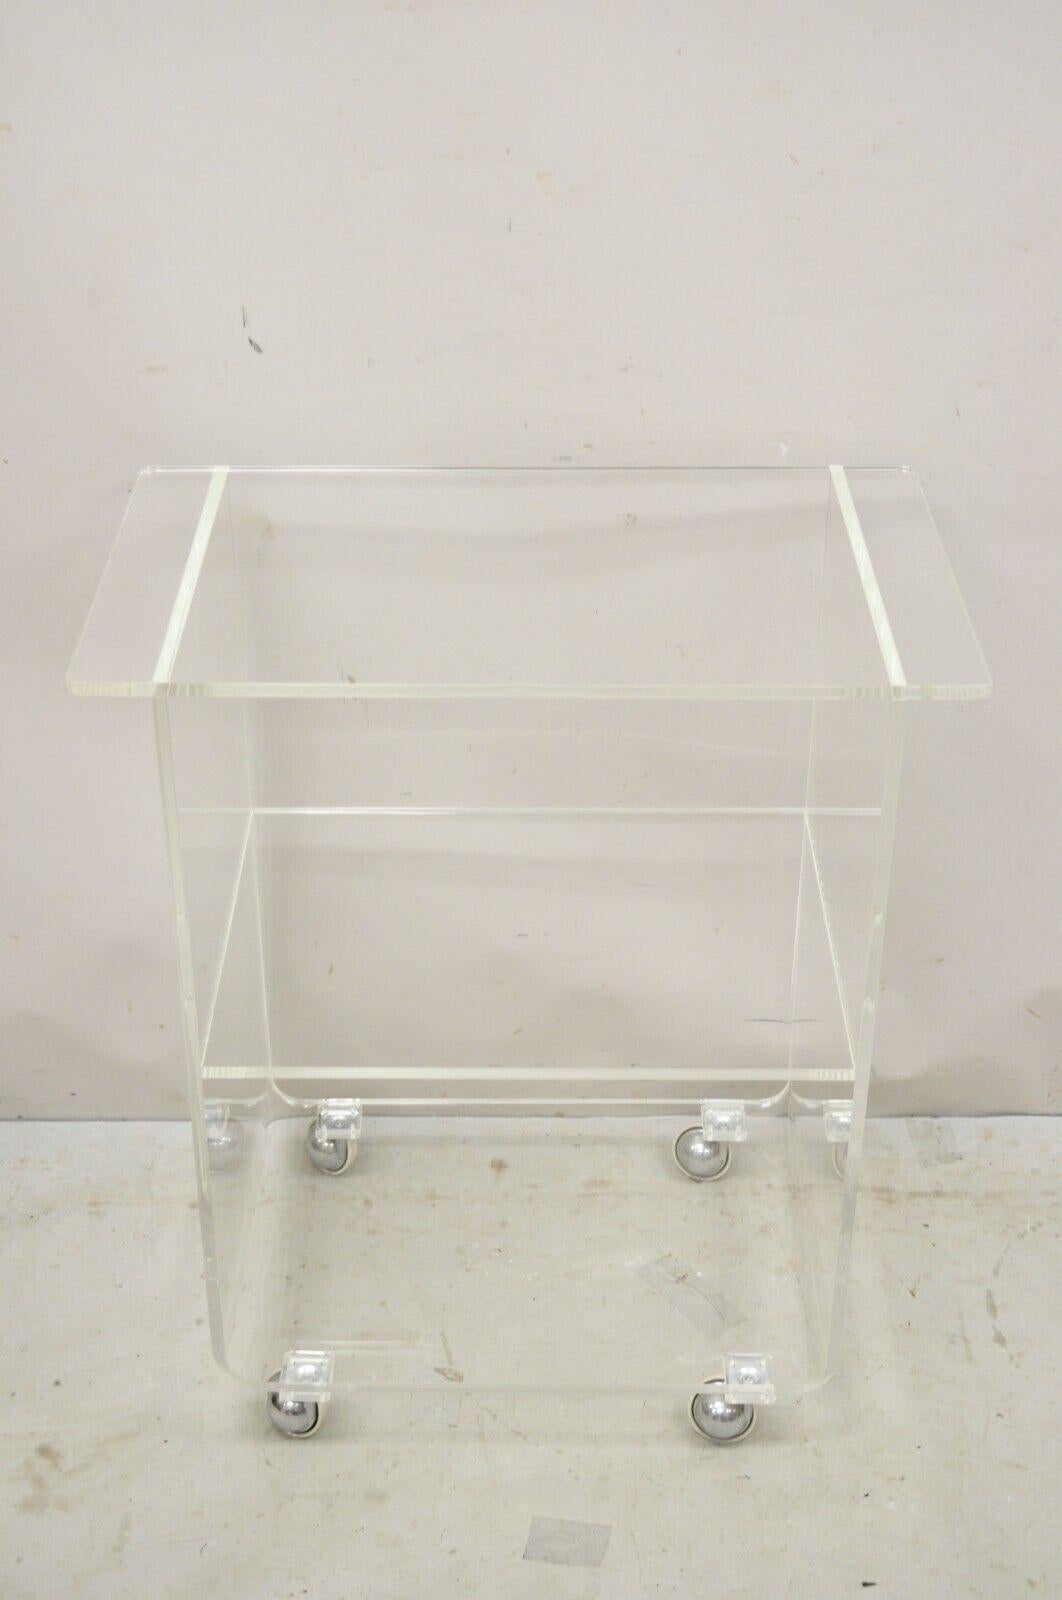 Vintage Clear Lucite Acrylic Mid Century Modern Rolling Bar Cart Side Table. Middle and lower shelf, rolling casters, clean Modernist lines. Circa Late 20th Century. Measurements: 32